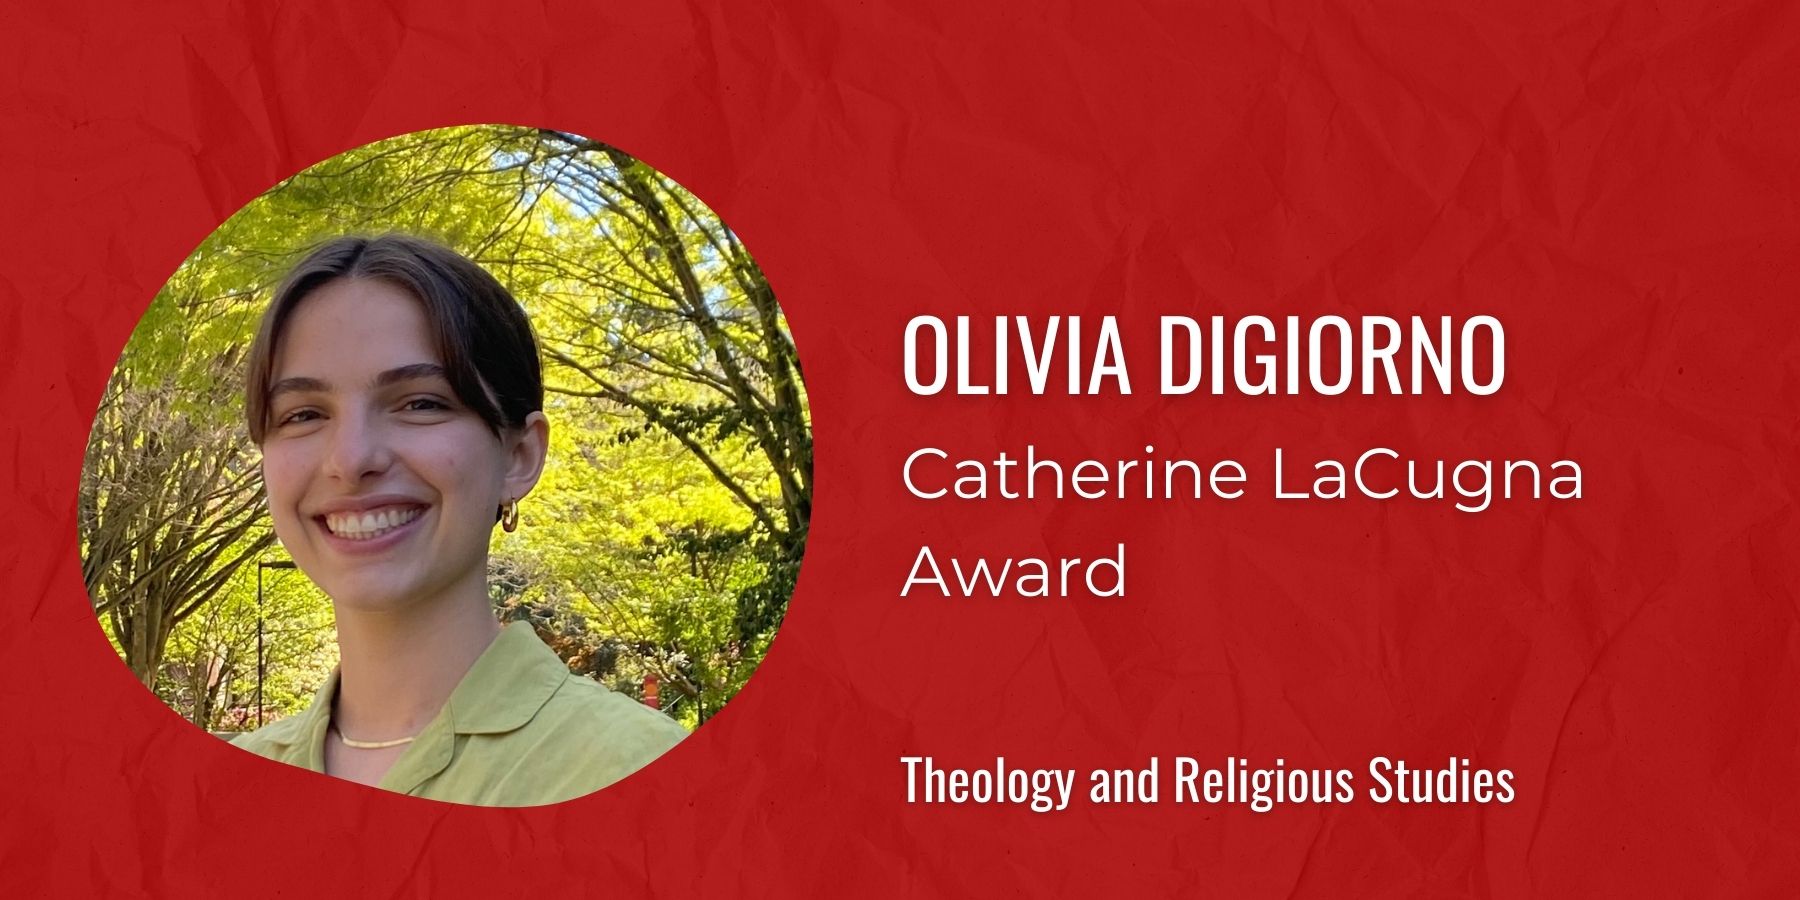 Image of Olivia DiGiorno and text: Catherine LaCugna Award, Theology and Religious Studies
